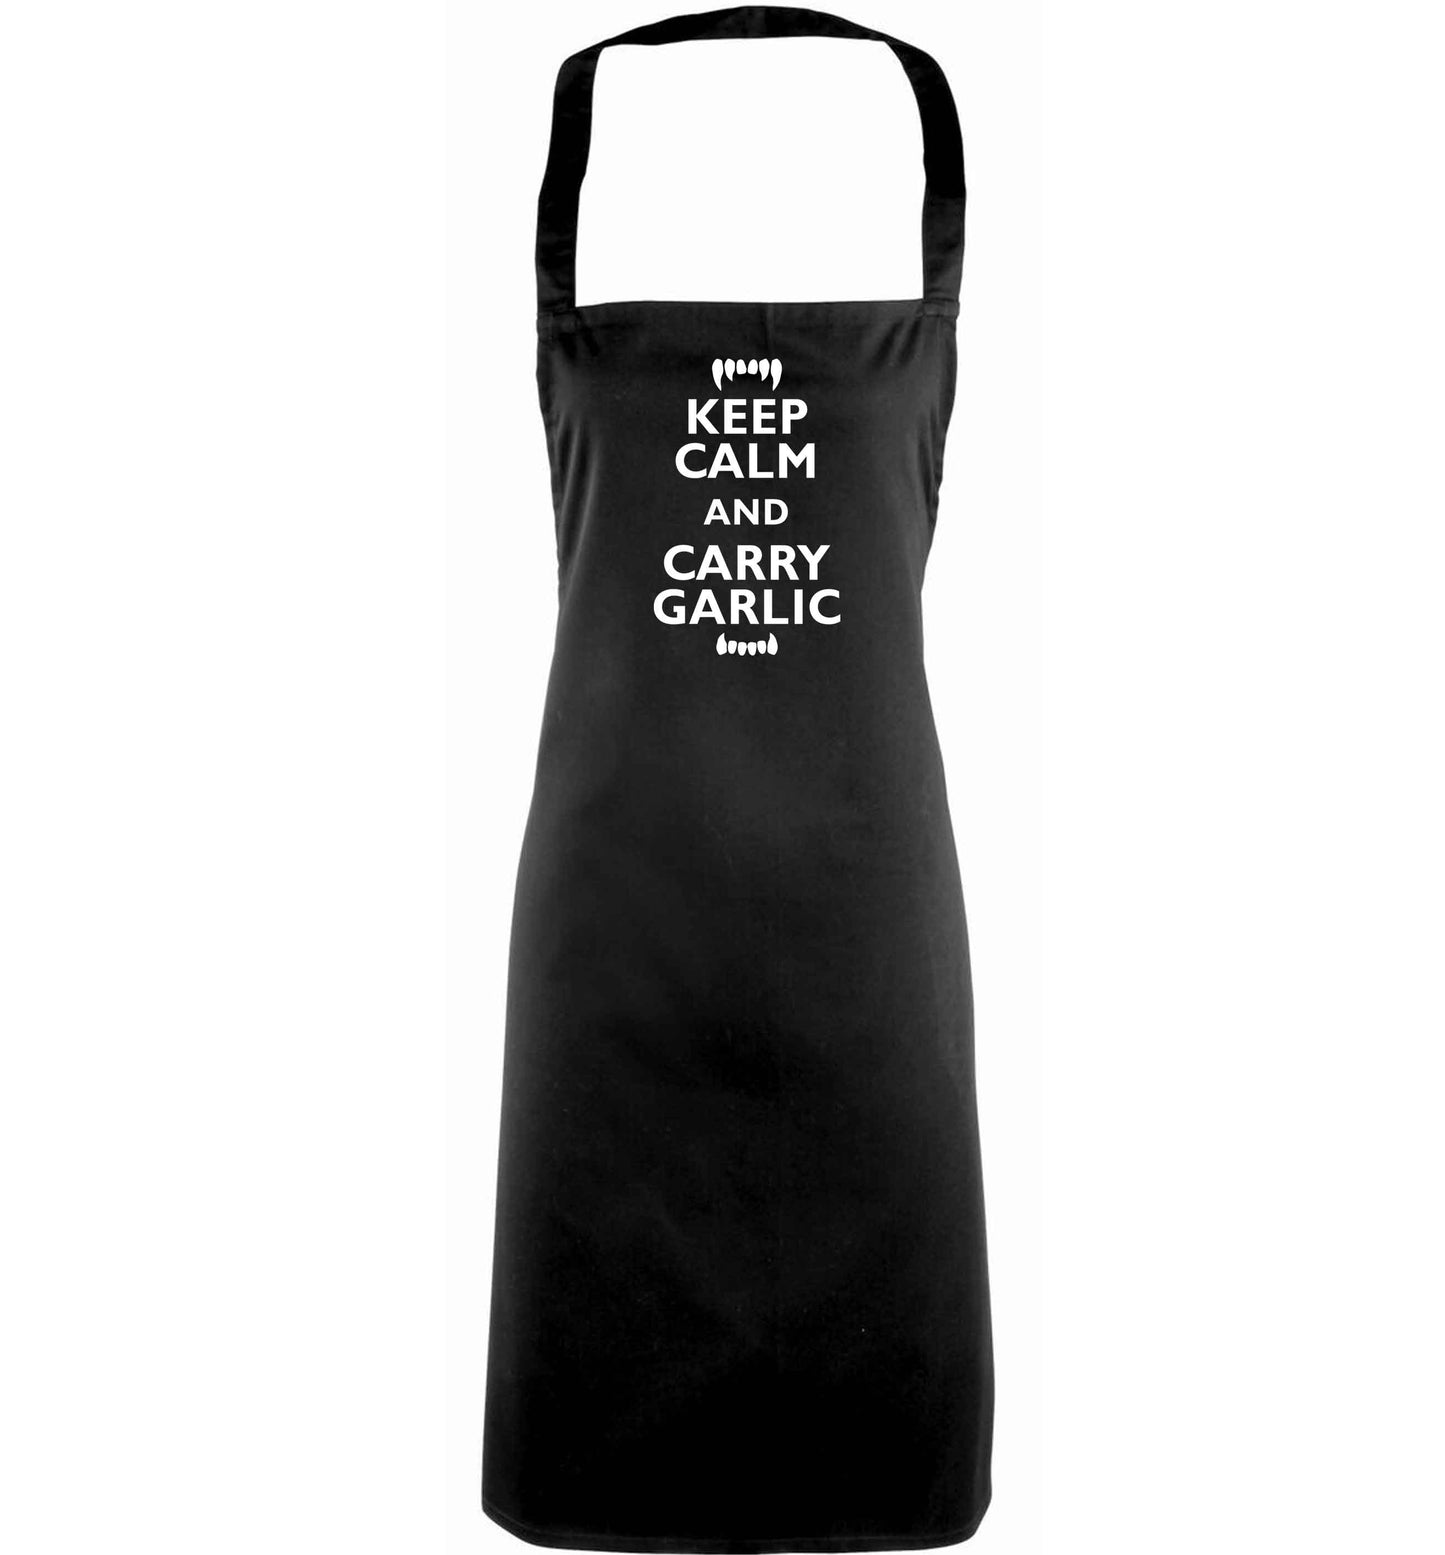 Keep calm and carry garlic adults black apron